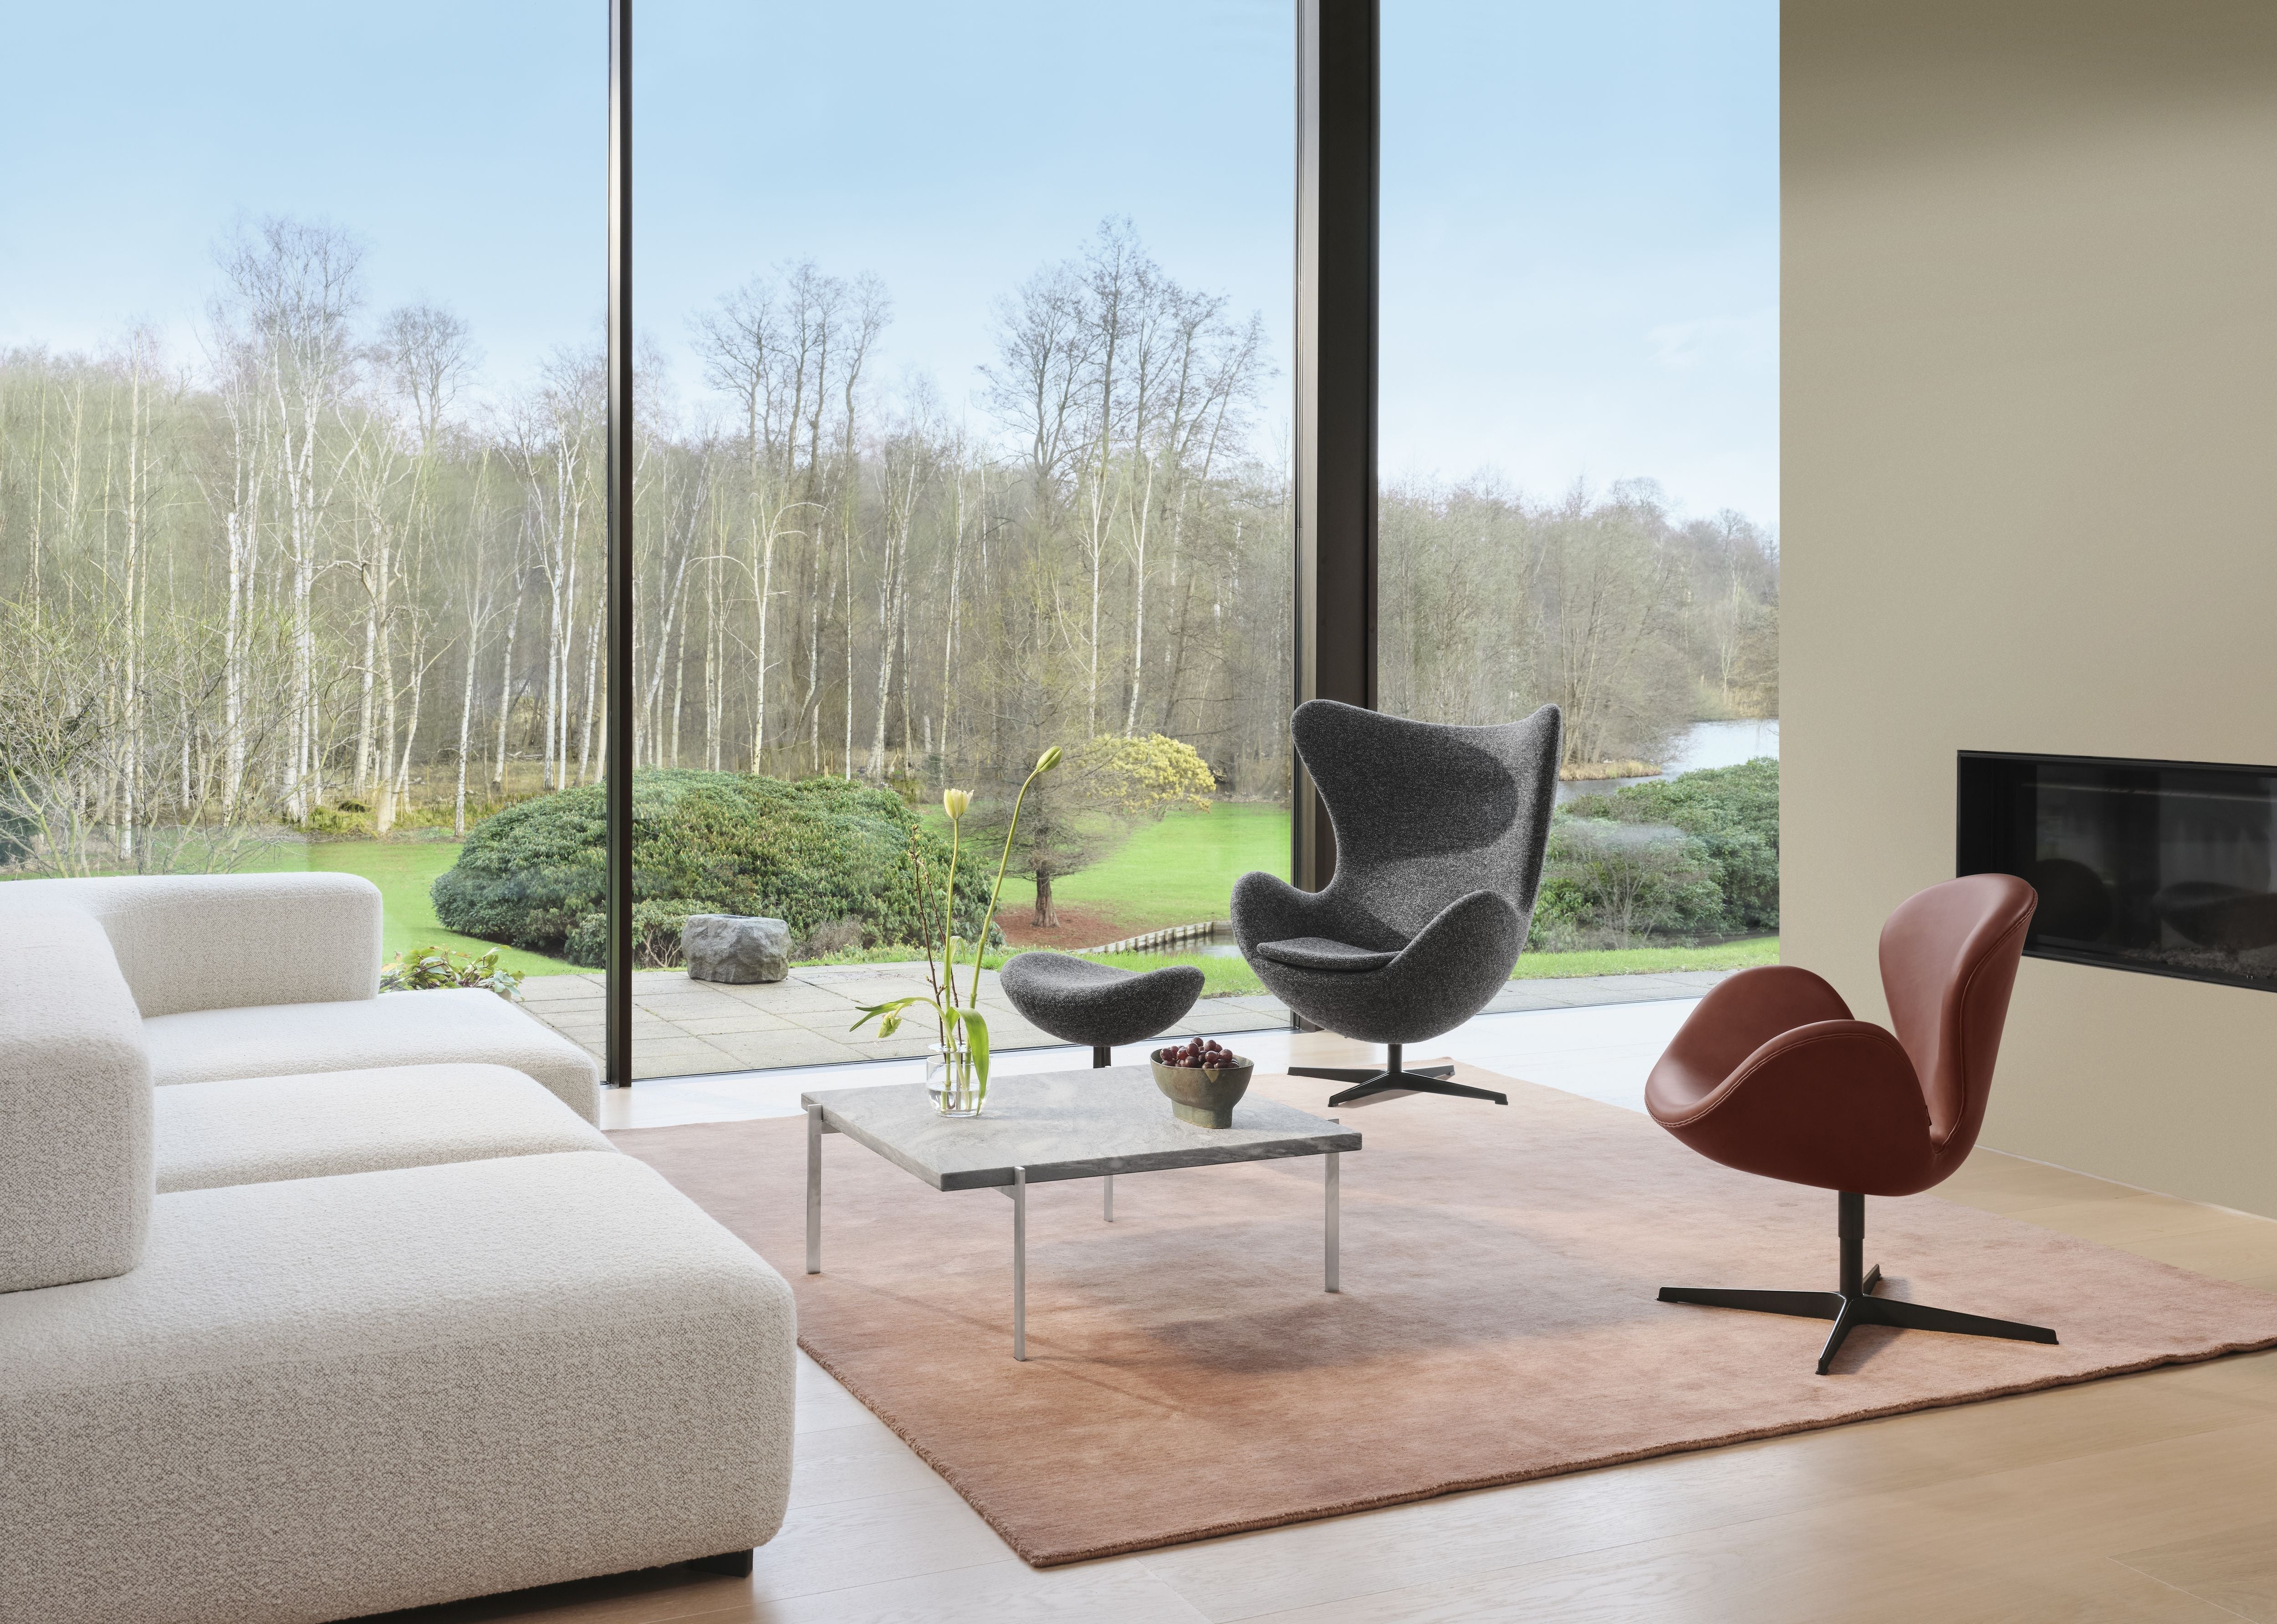 Fritz Hansen Swan Lounge Chair, Grace Chestnut Leather Anniversary Collection